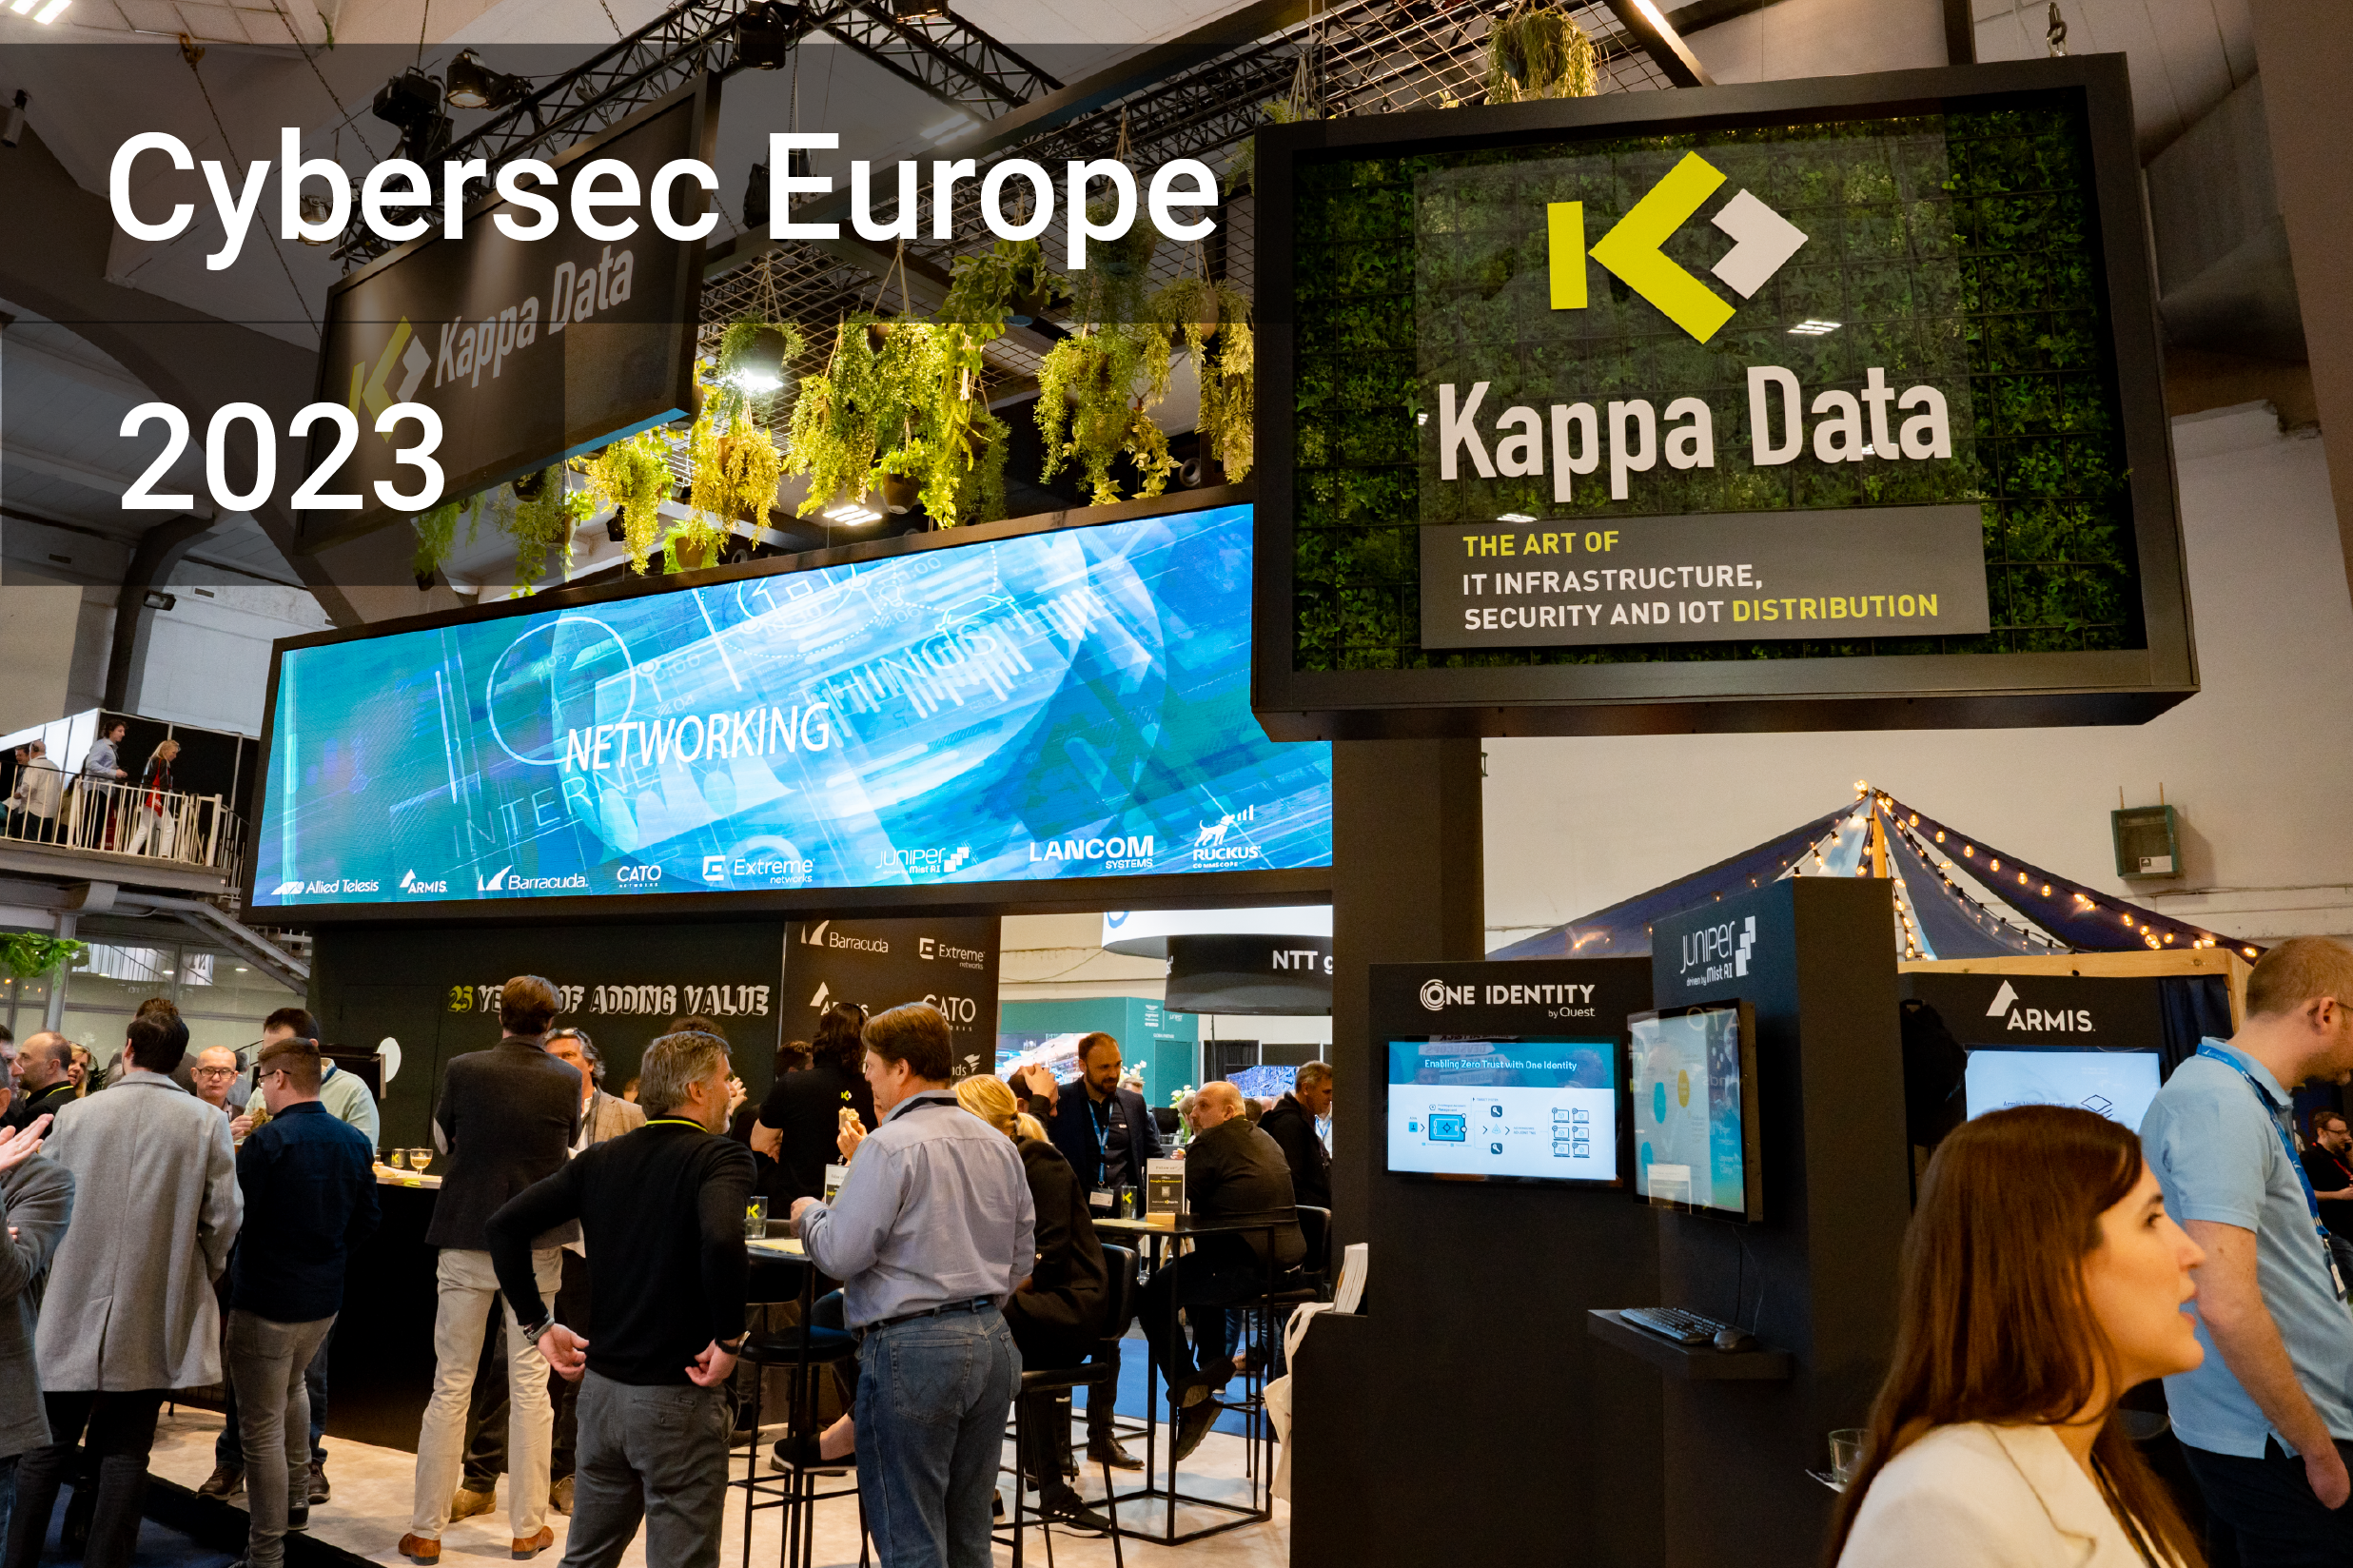 A day in the life ... Kappa Data CyberSec Europe 2023!